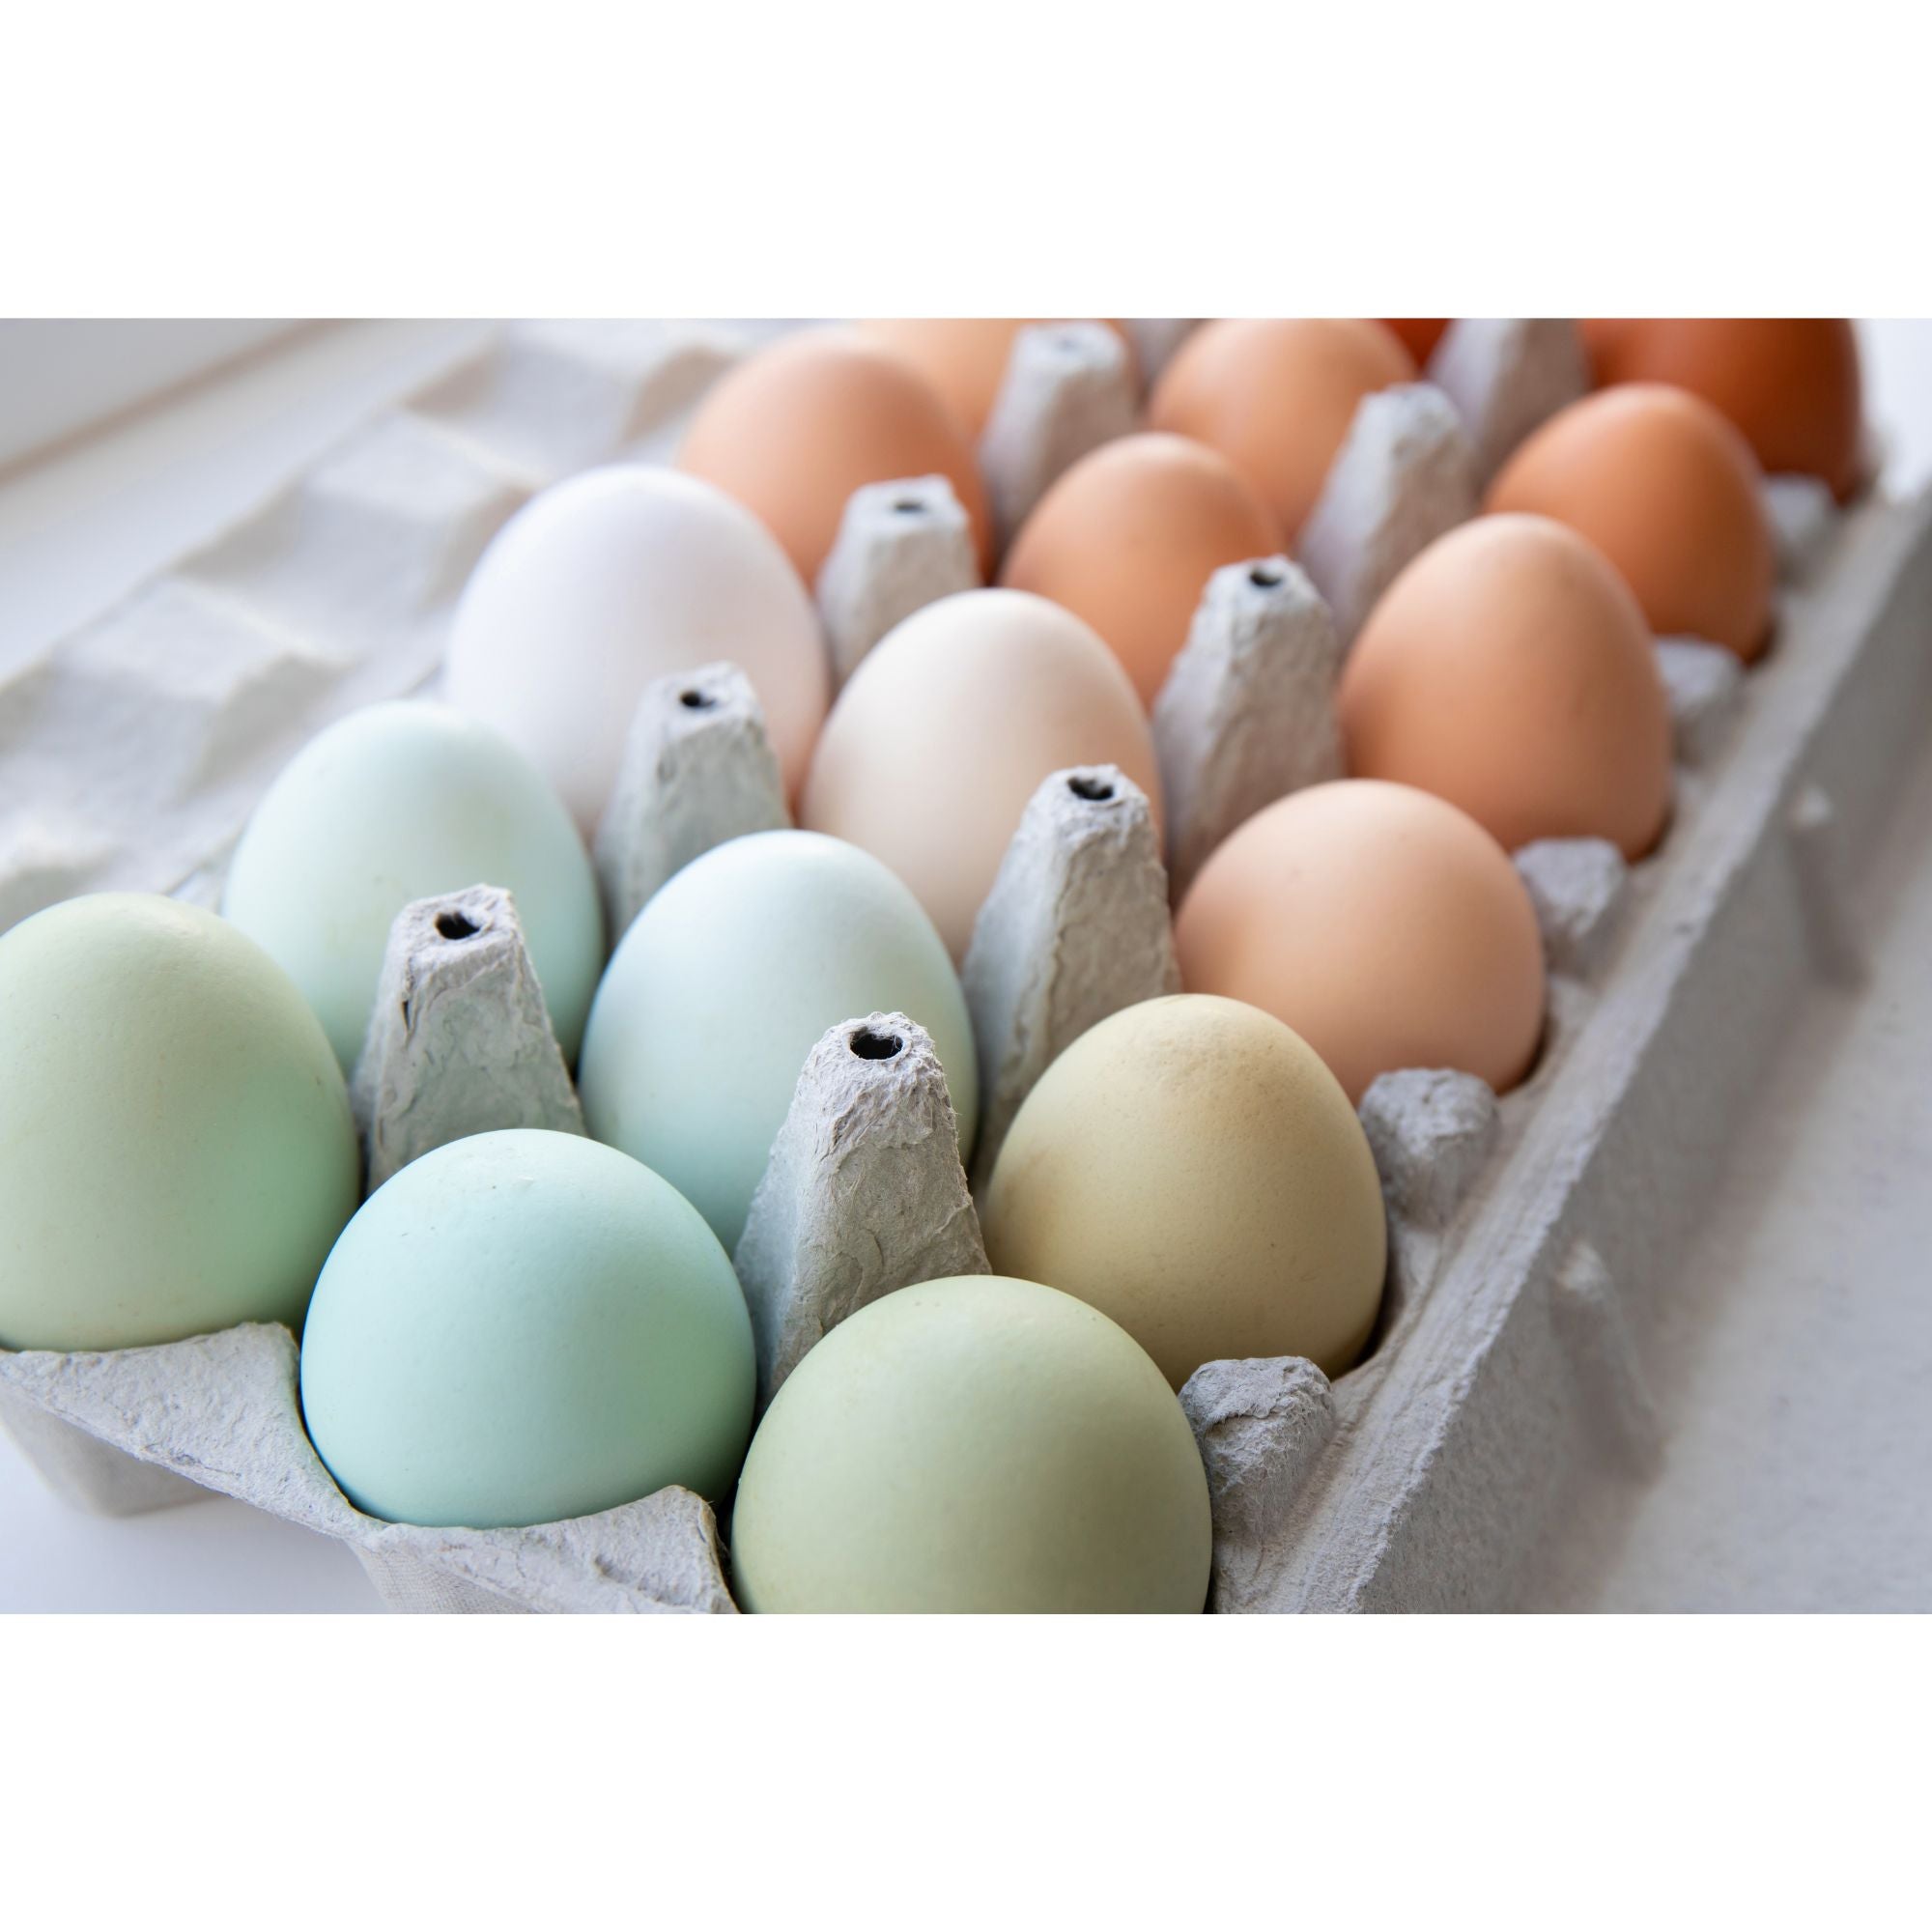 The color of egg a chicken lays depends on what breed it is. 